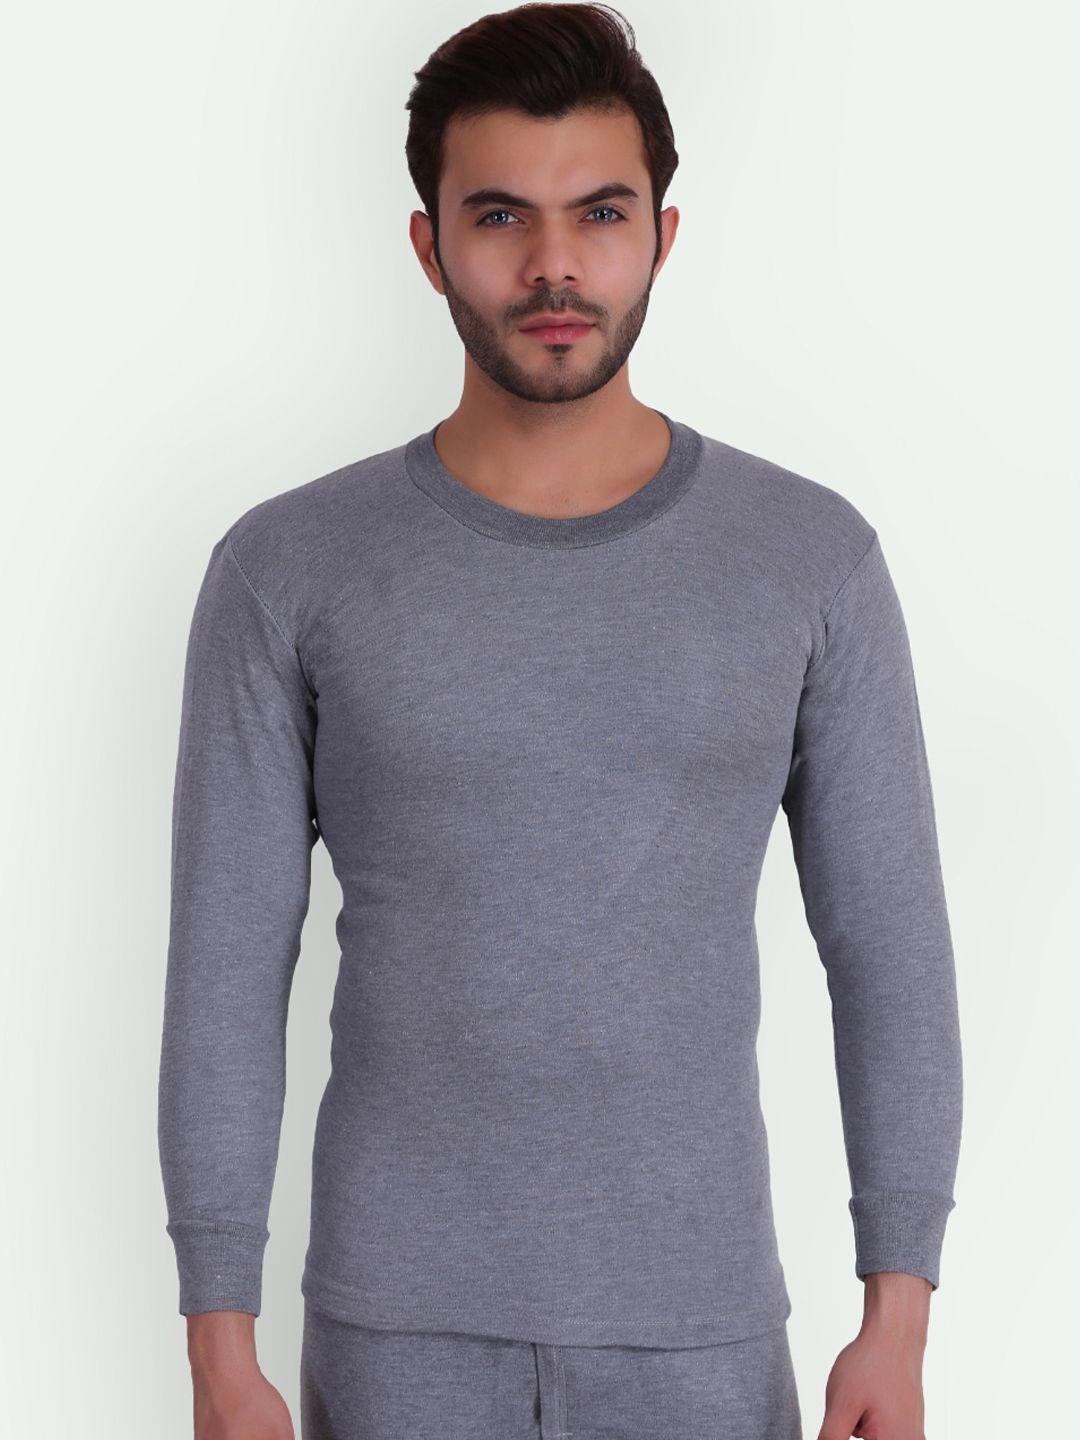 t.t. round neck long sleeves slim fit thermal top